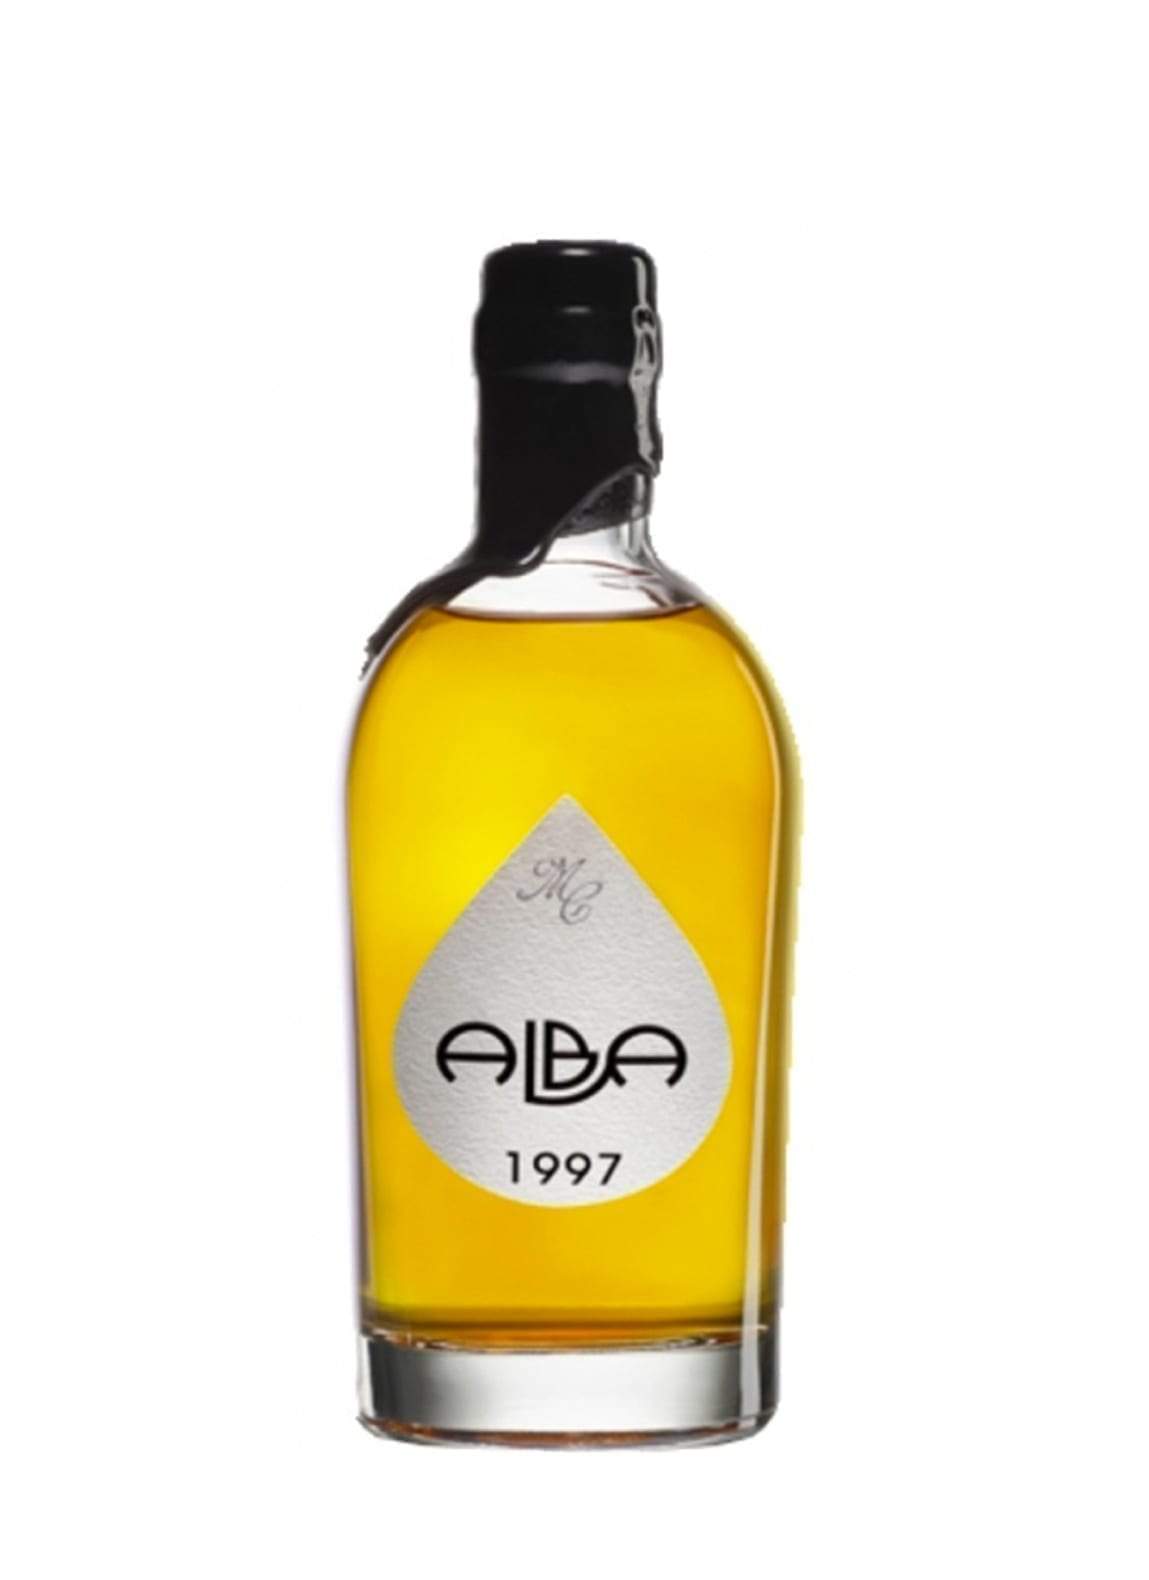 Michel Couvreur Whisky Alba Single Malt 22 years 46% 500ml | Whiskey | Shop online at Spirits of France